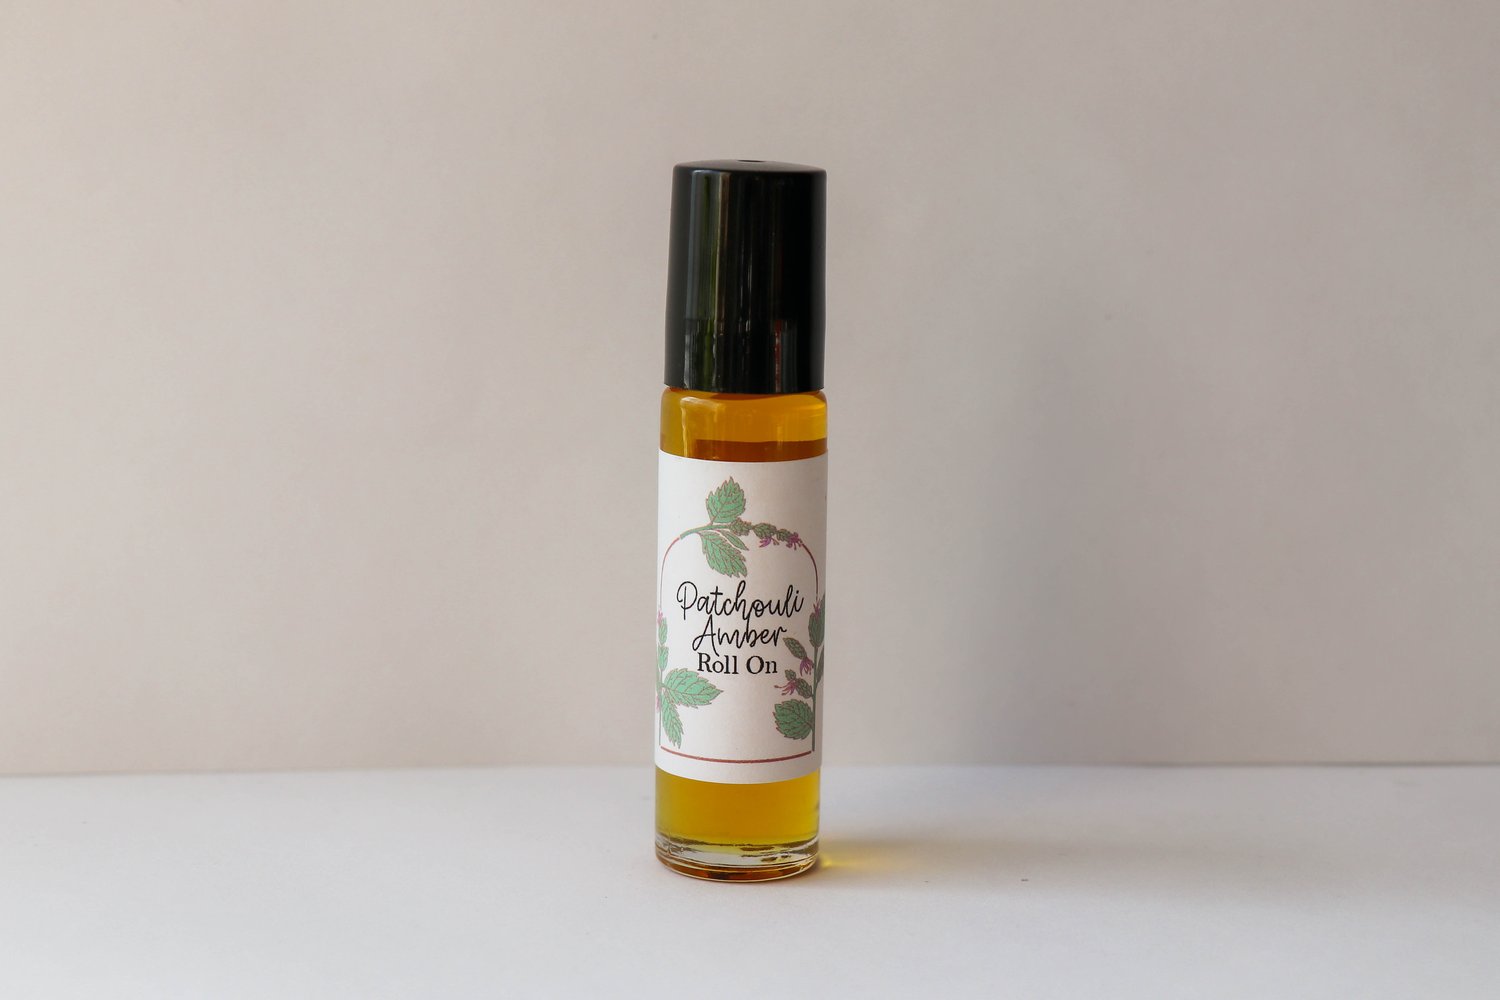 Patchouli Amber Roll On — Patchouli Garden